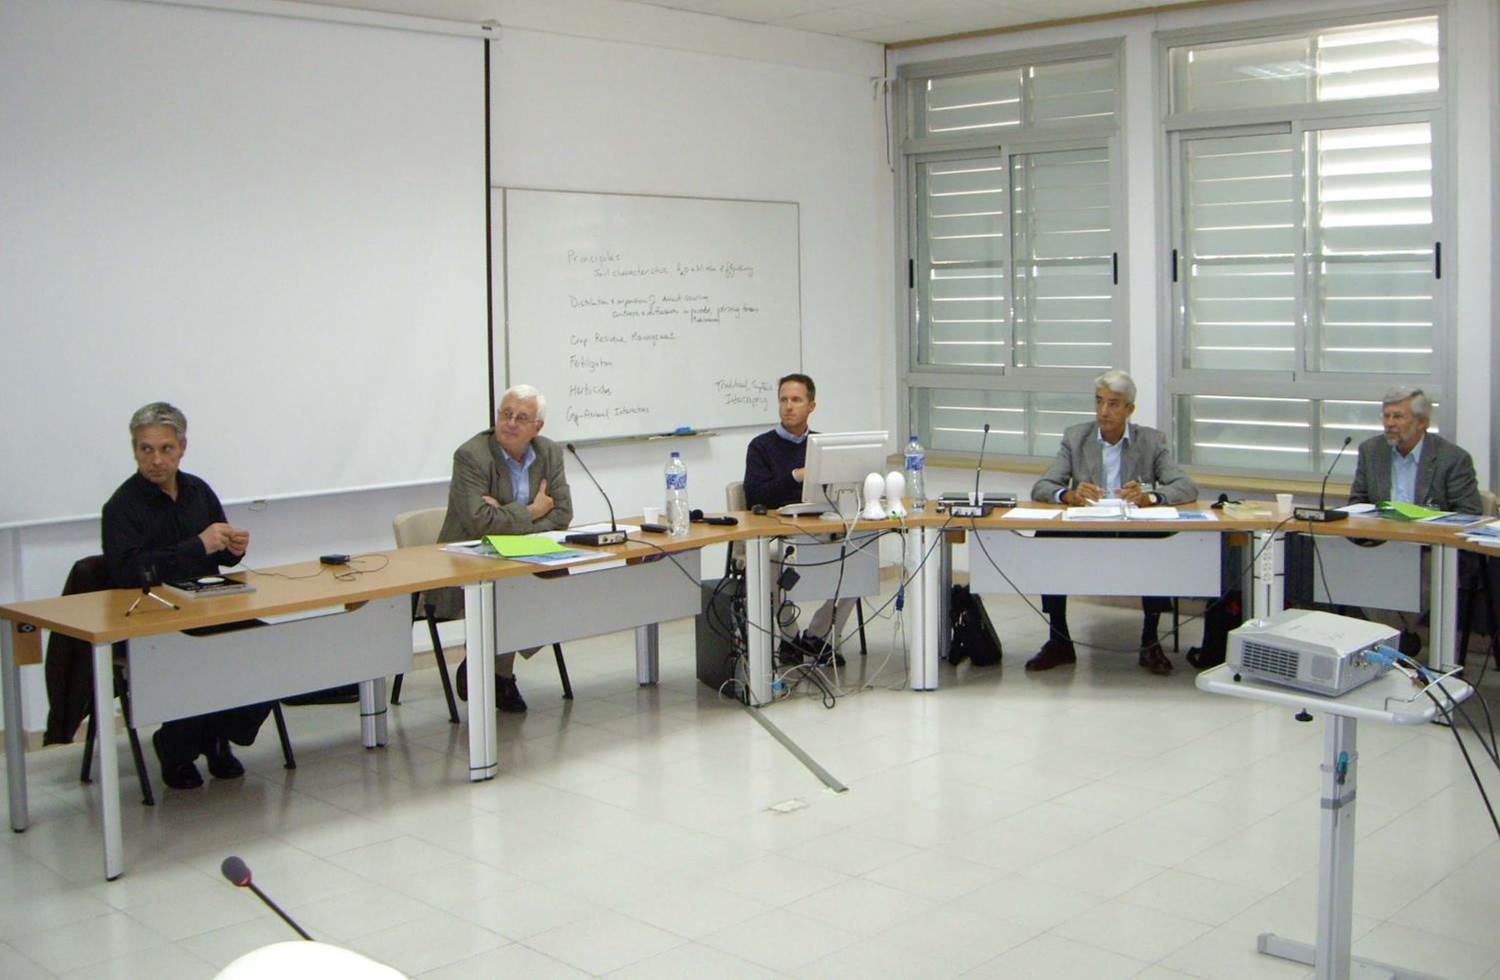 Instructors of conservation agriculture short-course in Zaragoza, Spain